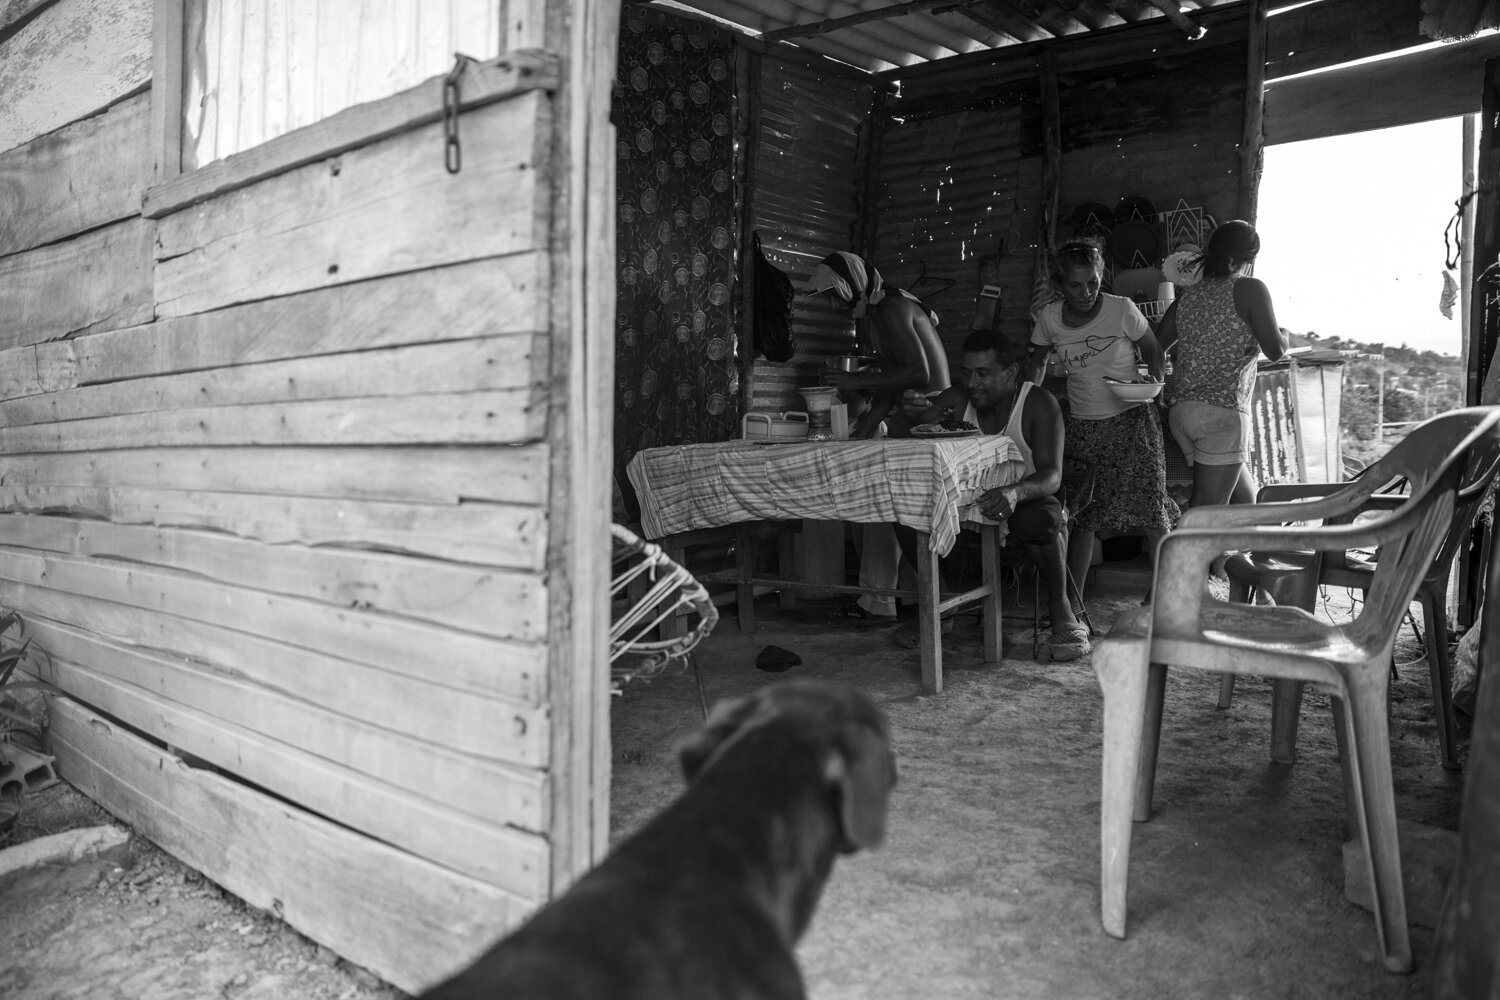  Lisandro Sanchez and his family prepare to eat lunch while their dog wiats for scraps by the door.  Families in Alfonso Gomez subsist off beans, rice, peas with occasional meats like hot dogs. Families go to the Cucuta’s wholesale market, when trans